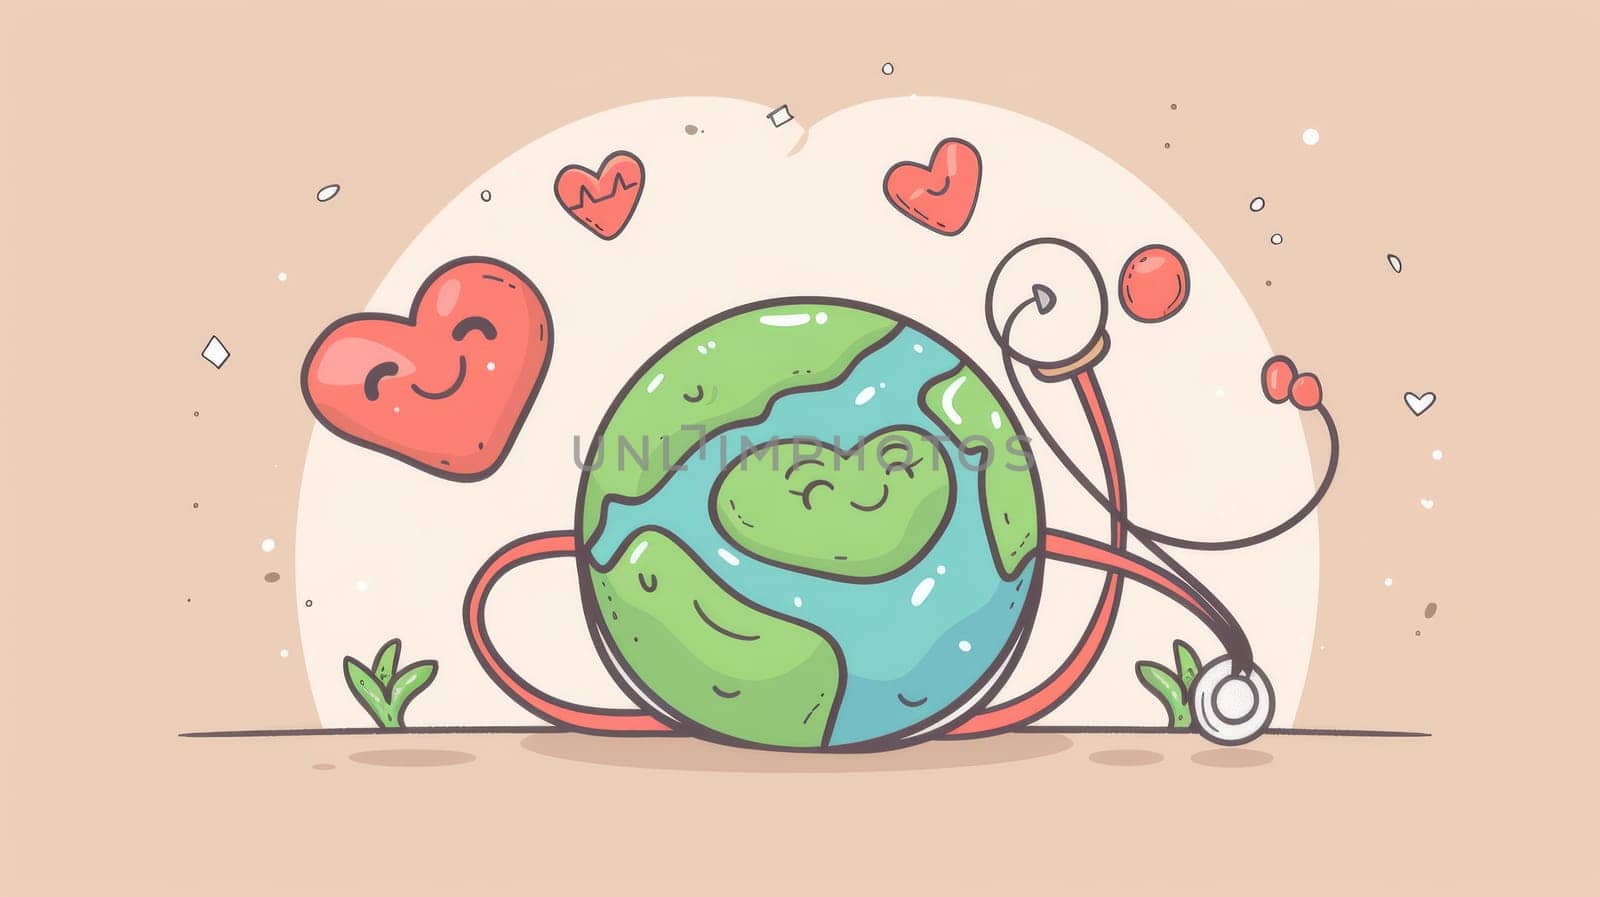 'World Health Day' concept modern, 7 April, with earth, heart, stethoscope hand drawn. Use for web, banner, campaign, social media posts.